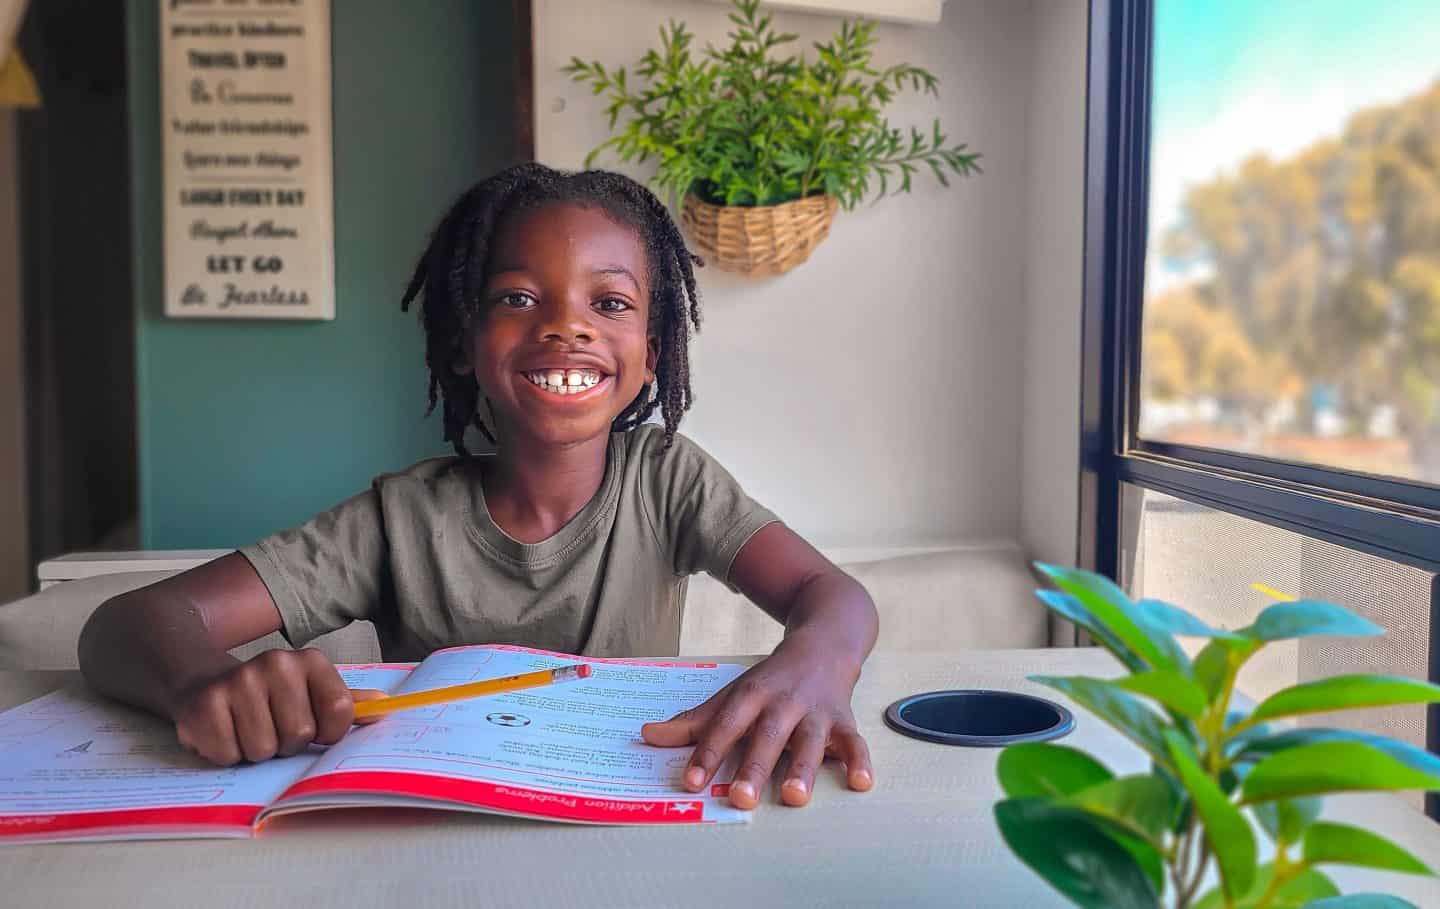 A young boy sits at a desk with a school workbook open smiling and holding a pencil enjoying his homeschooling lesson.